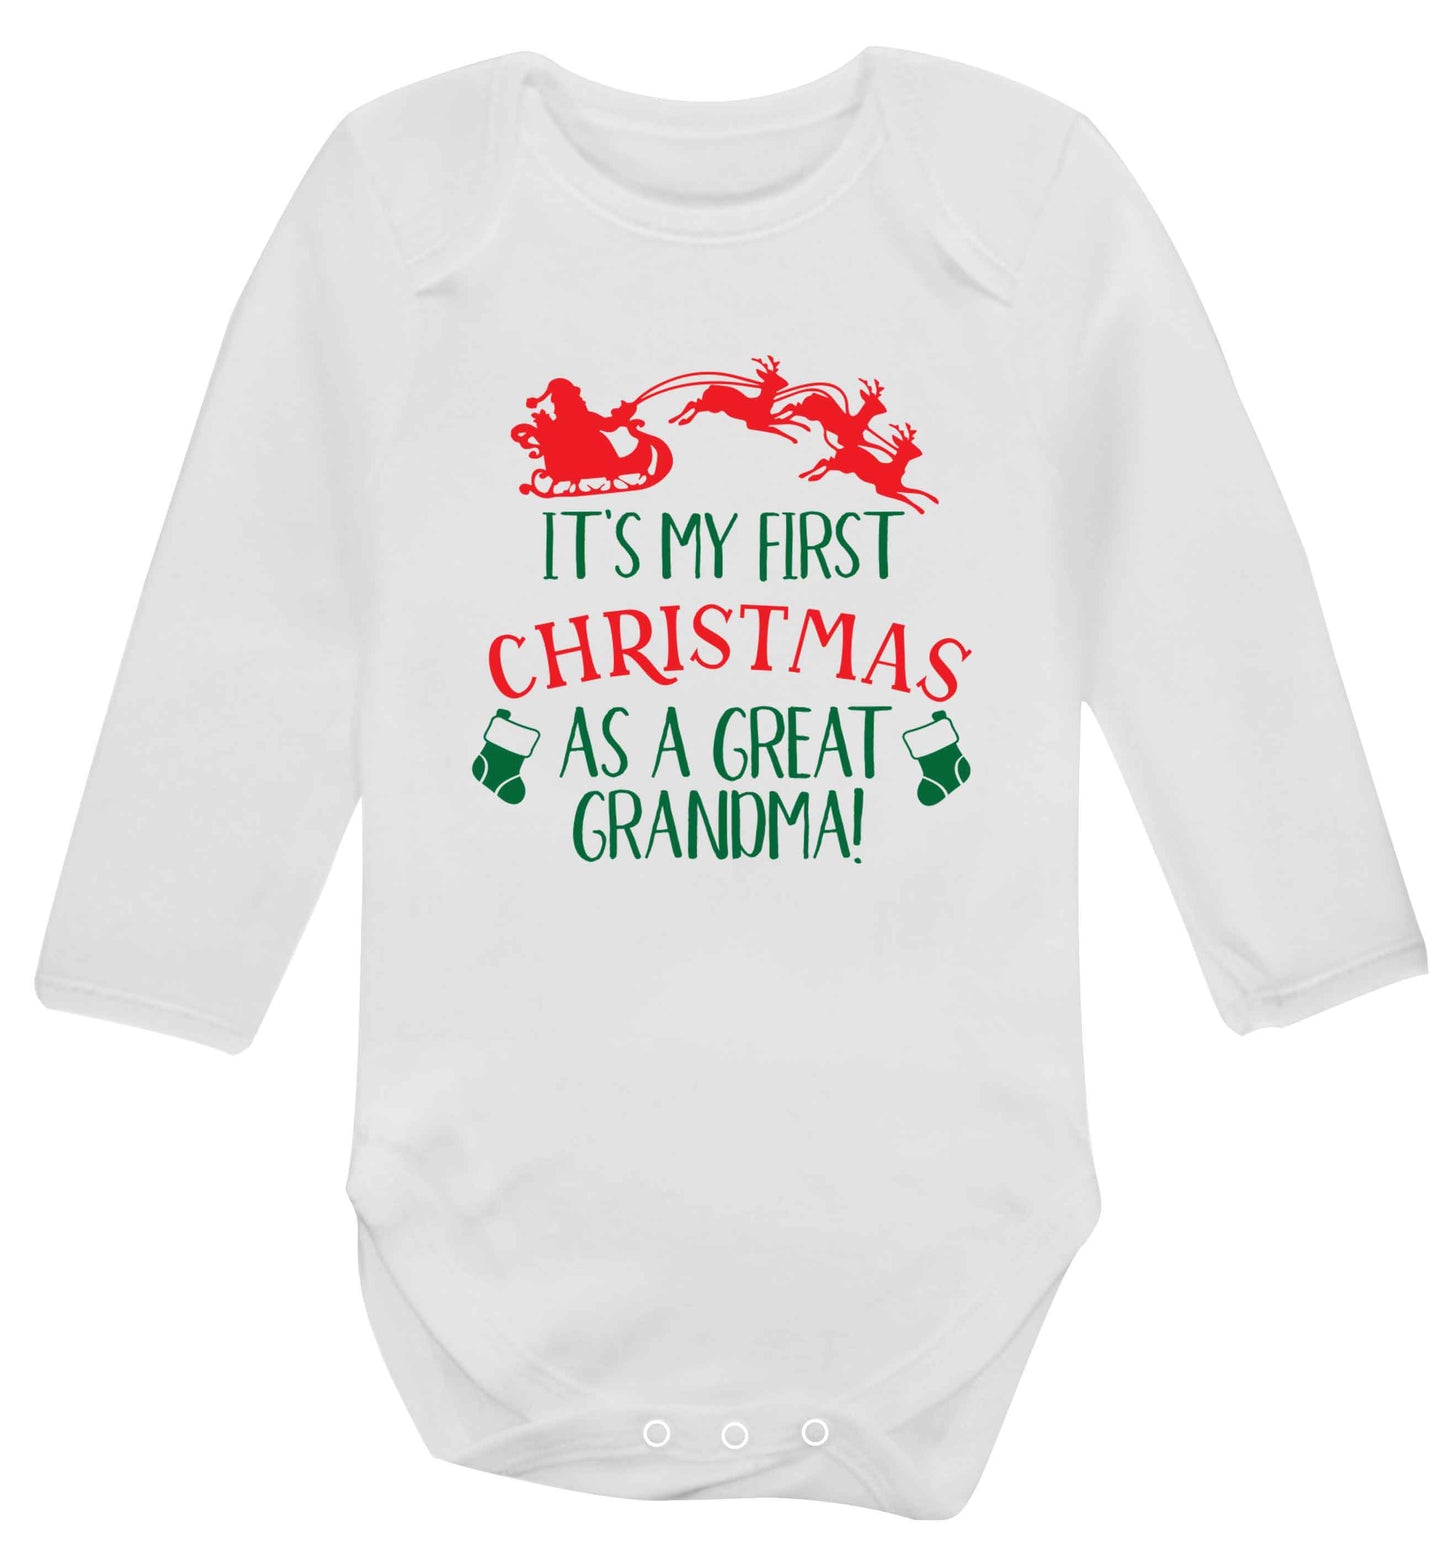 It's my first Christmas as a great grandma! Baby Vest long sleeved white 6-12 months